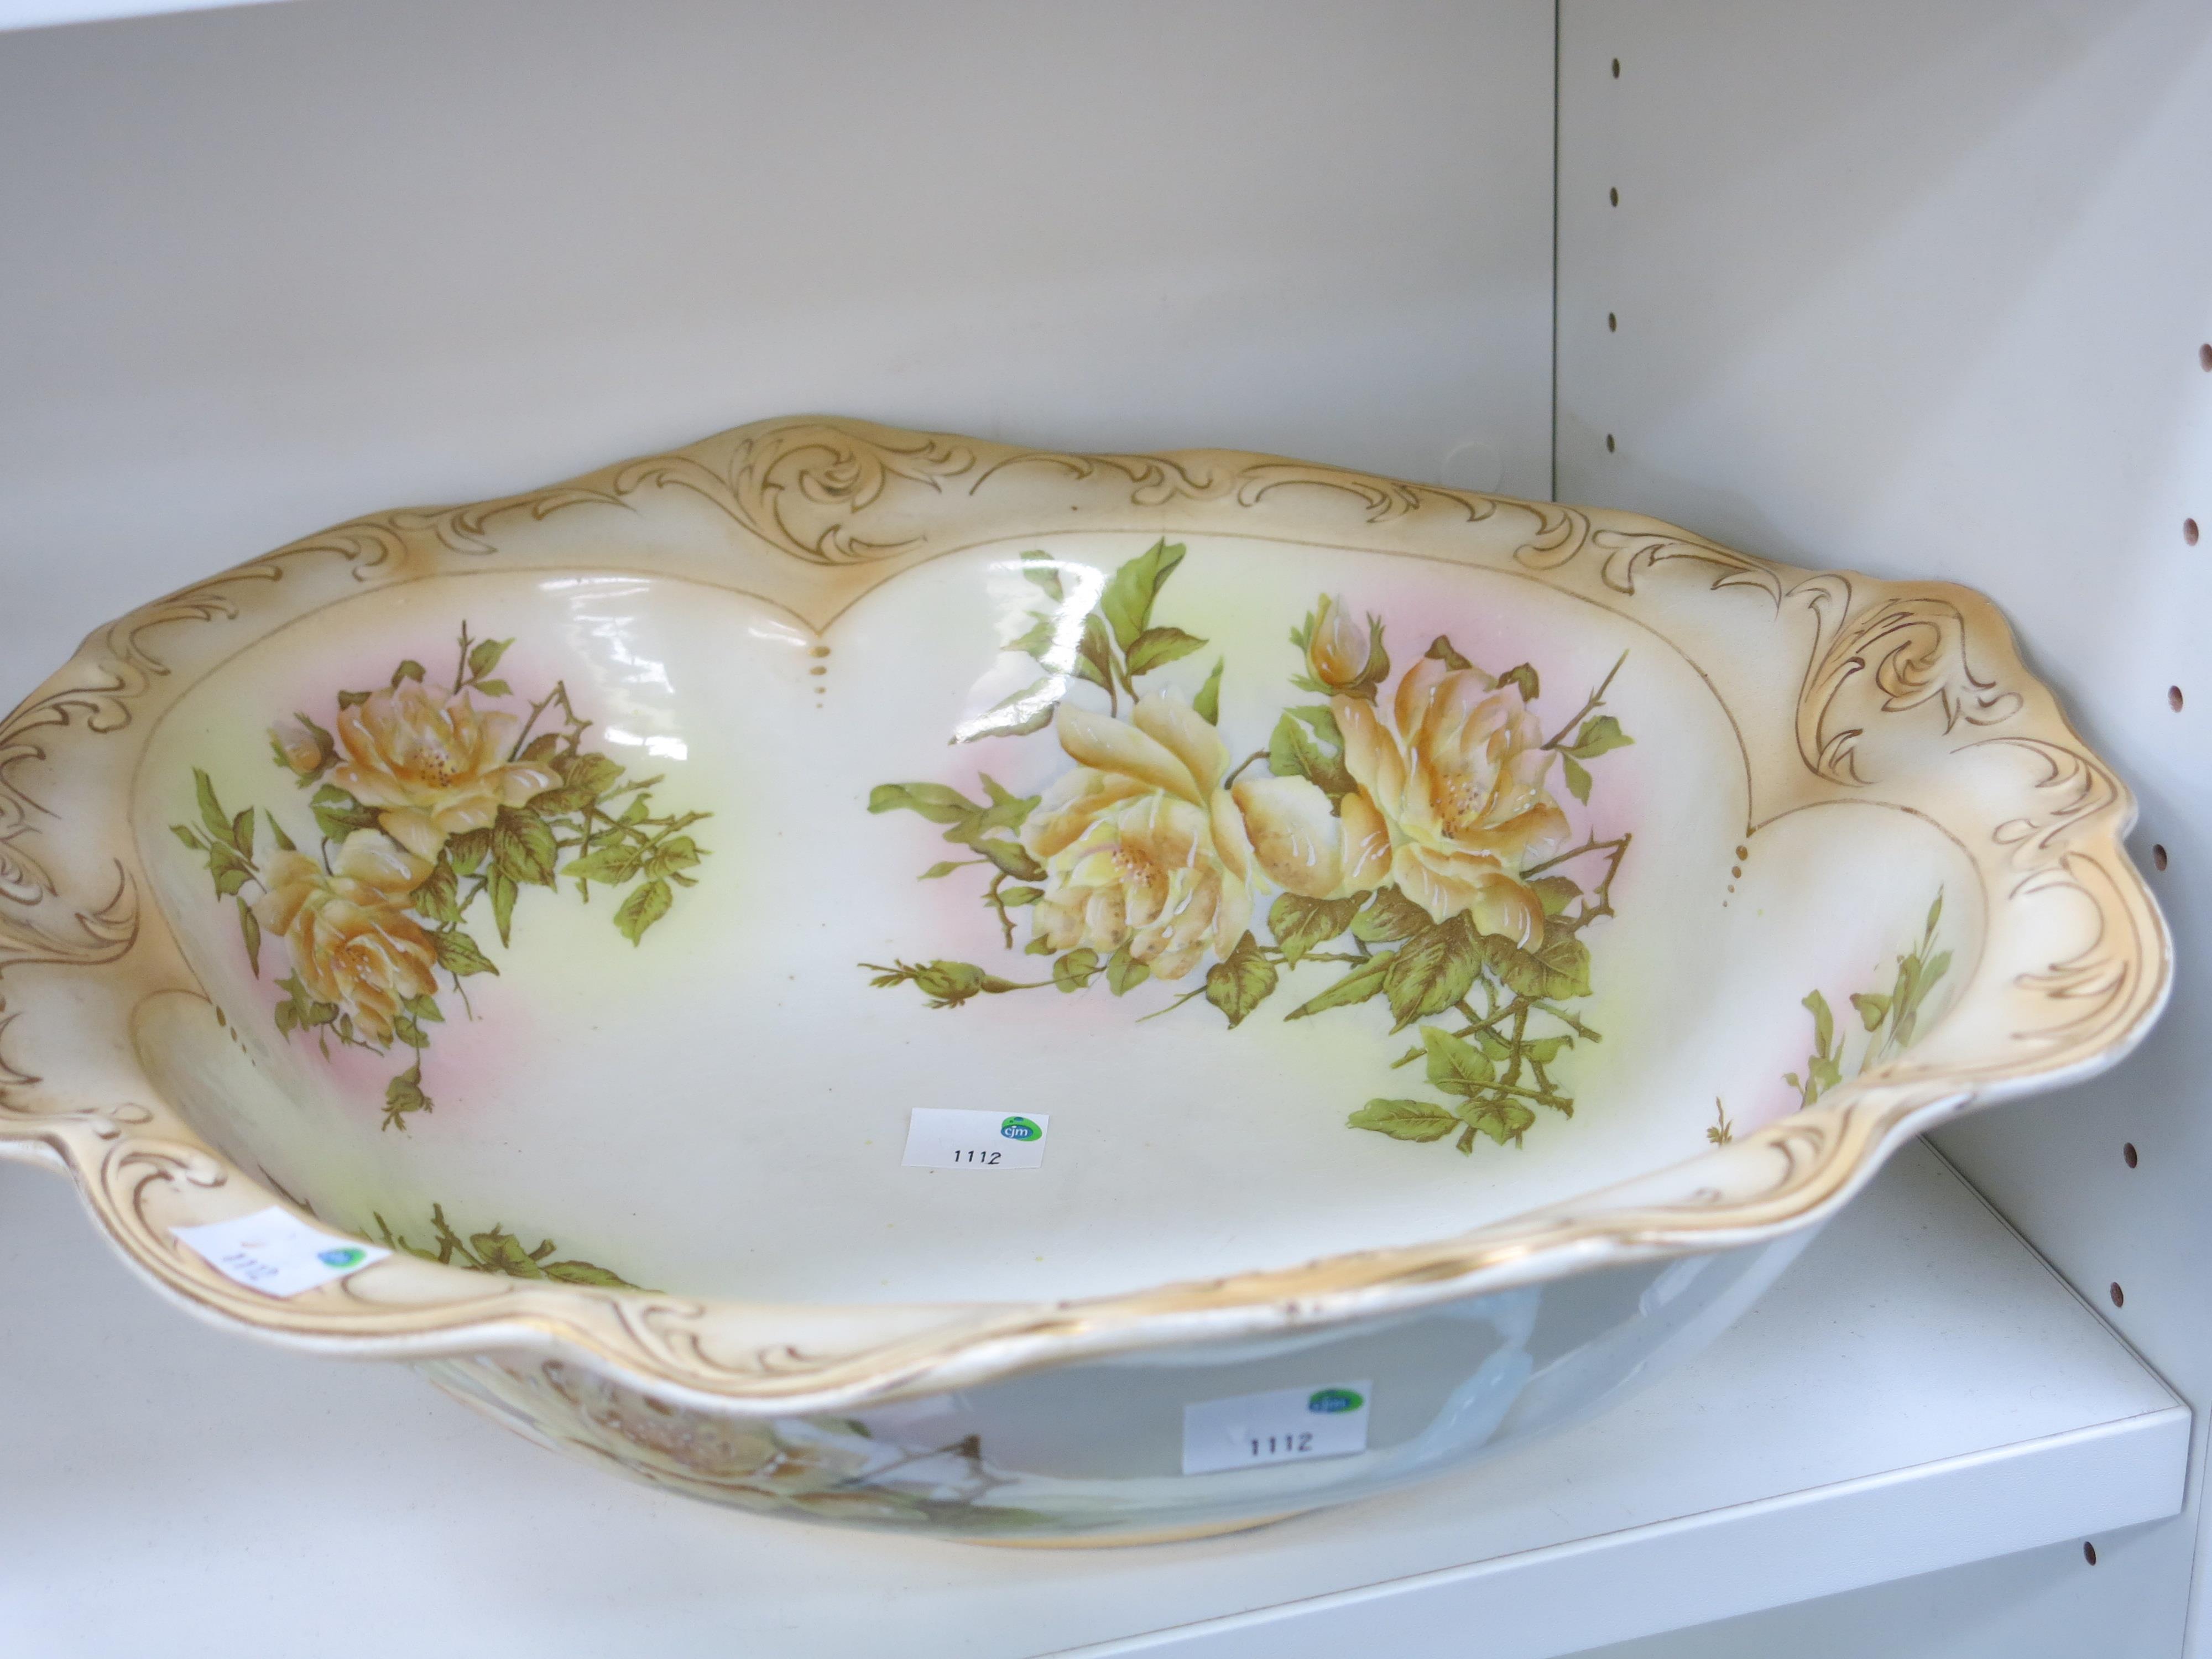 This is a Timed Online Auction on Bidspotter.co.uk, Click here to bid. A Barkers & Kent Ltd bowl